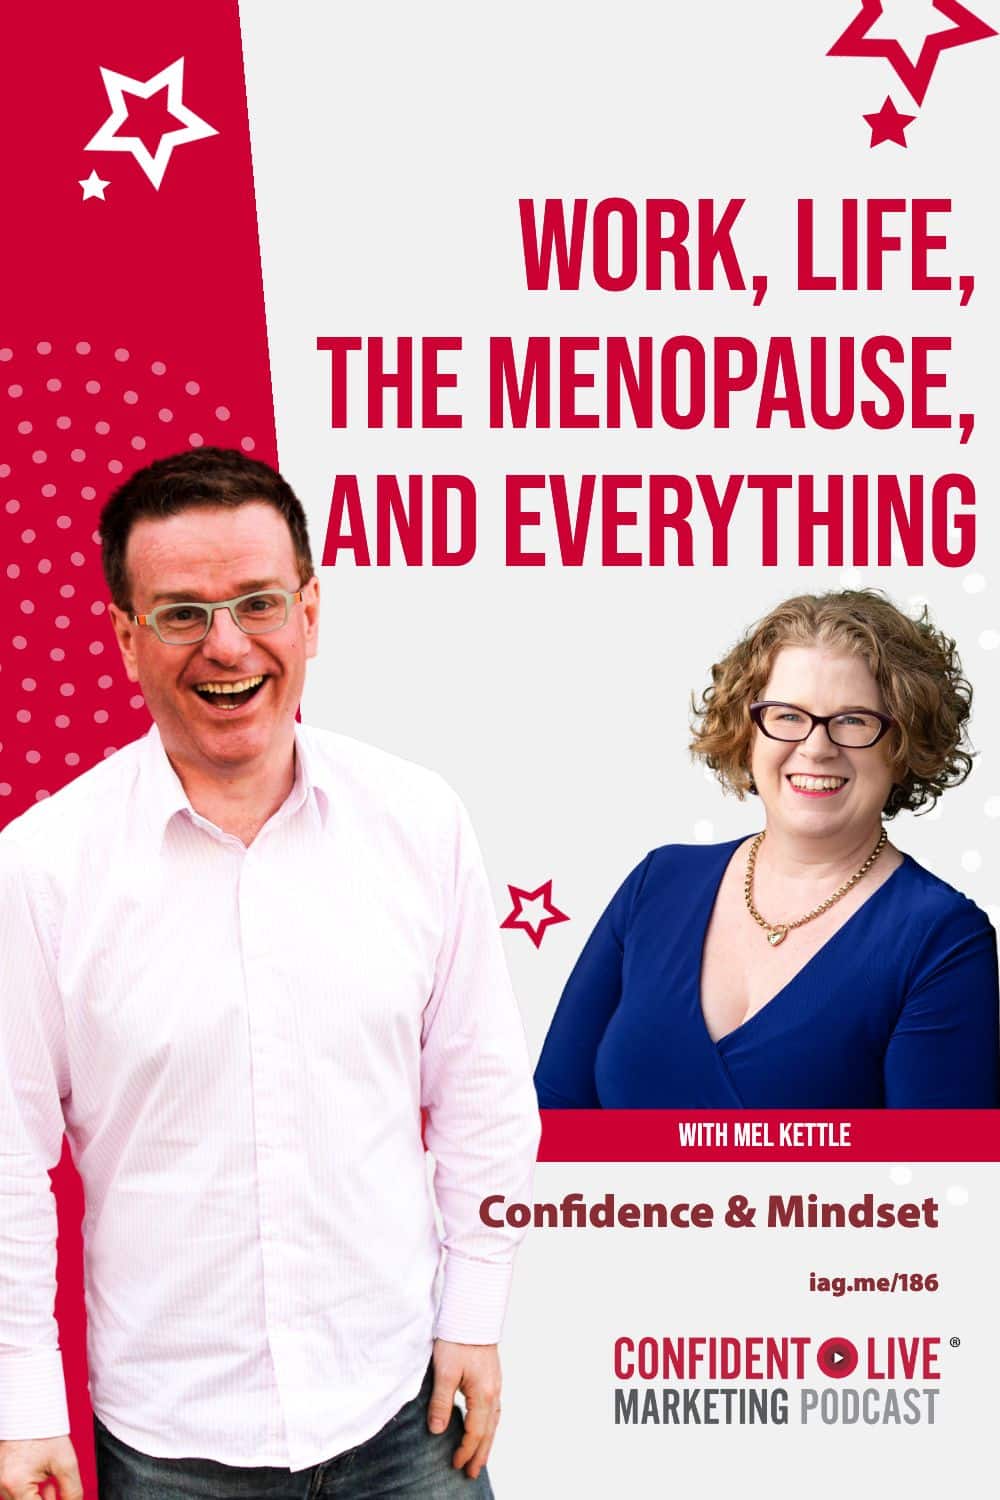 Work, Life, The Menopause, And Everything